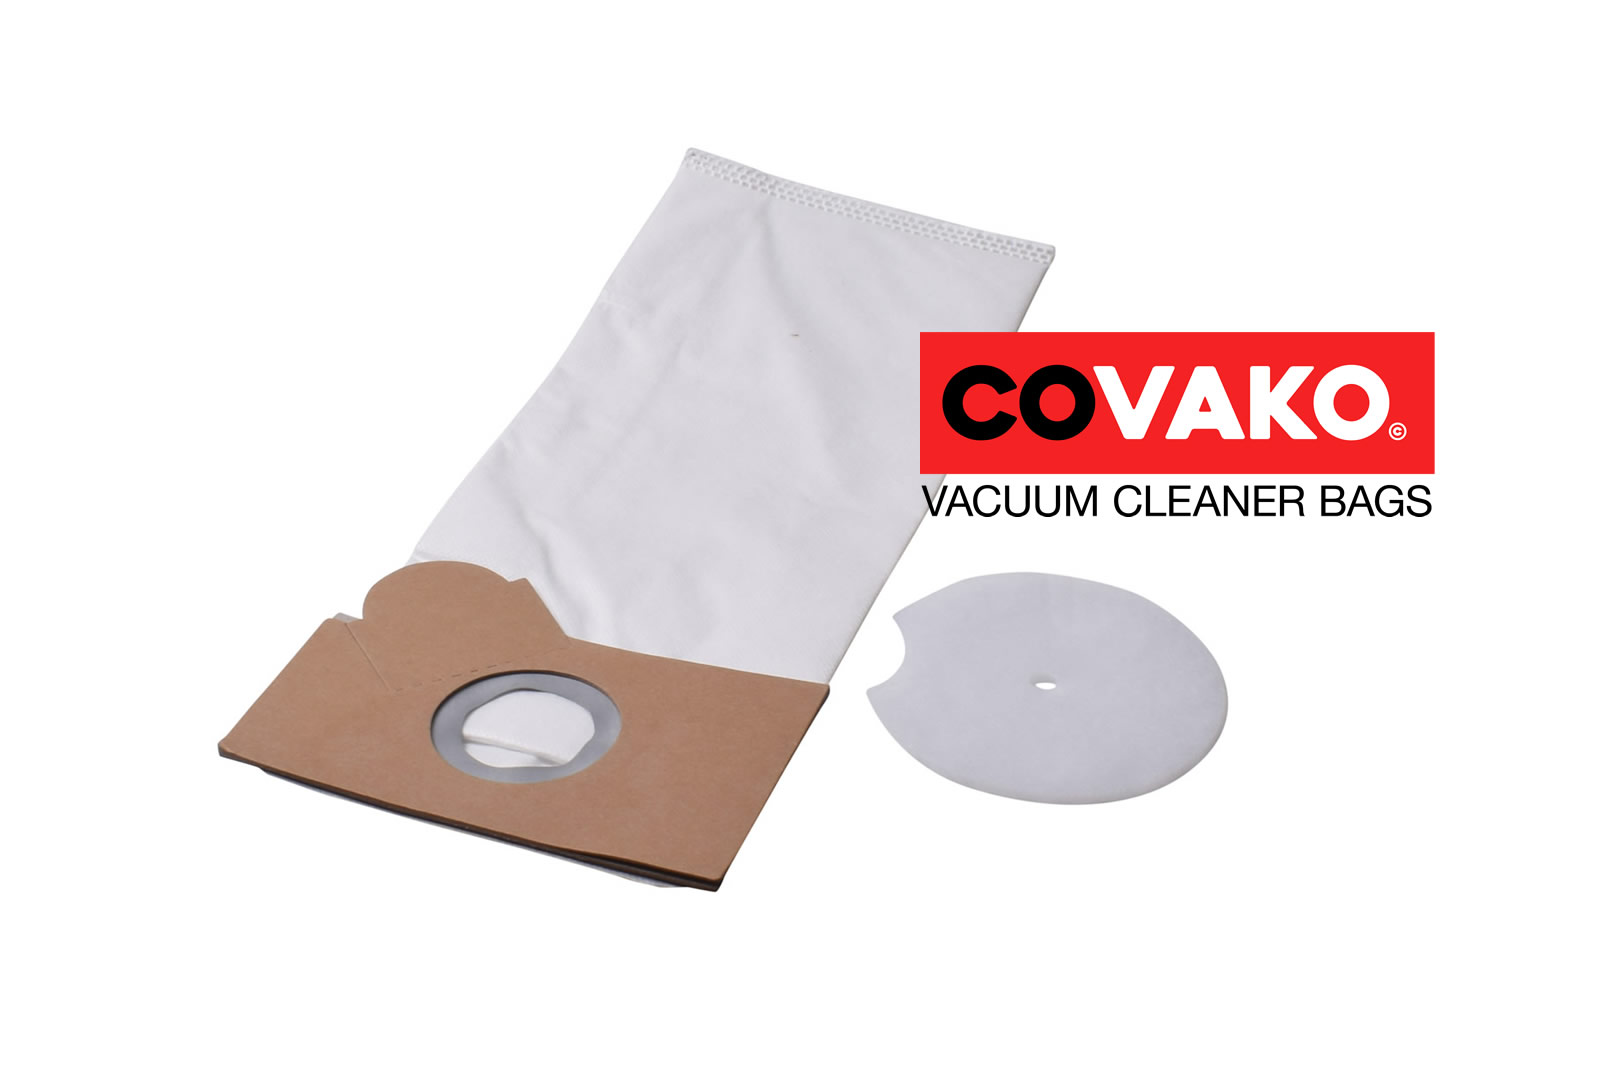 Nilco Combi 17-36 / Synthesis - Nilco vacuum cleaner bags